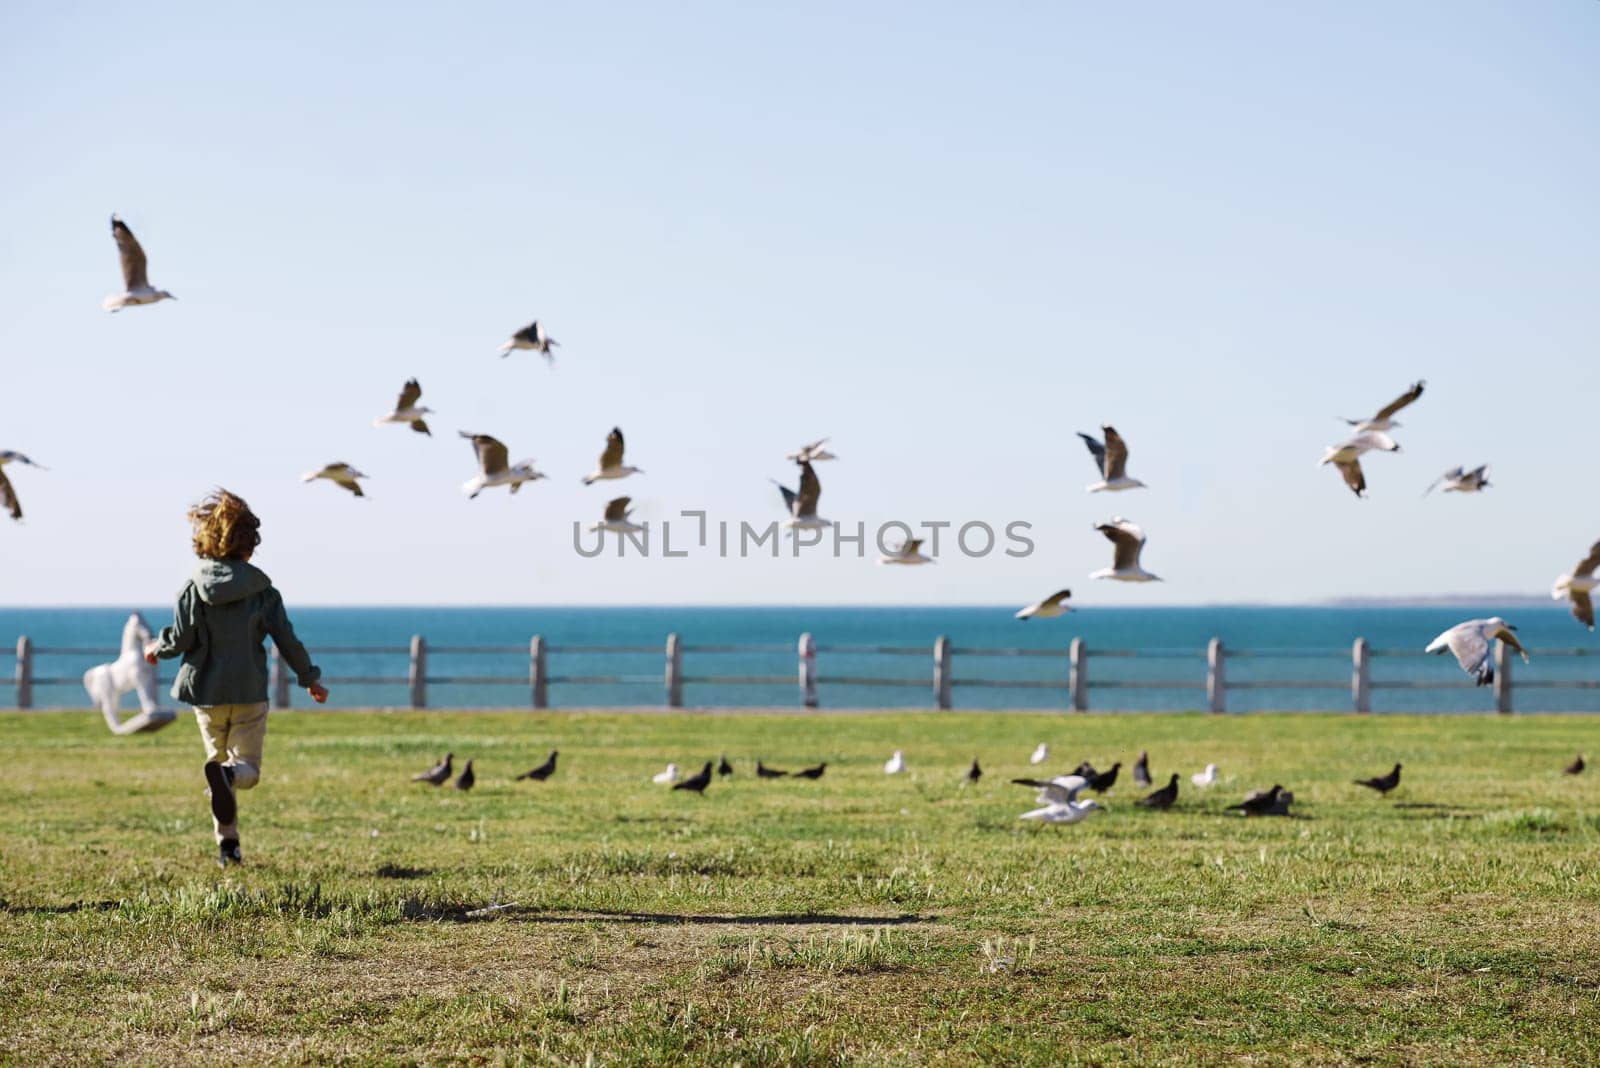 Playful, back and boy running after birds in a park for freedom, summer and happy in Australia. Holiday, youth and excited child playing on a field by the sea during a vacation with animals in nature by YuriArcurs